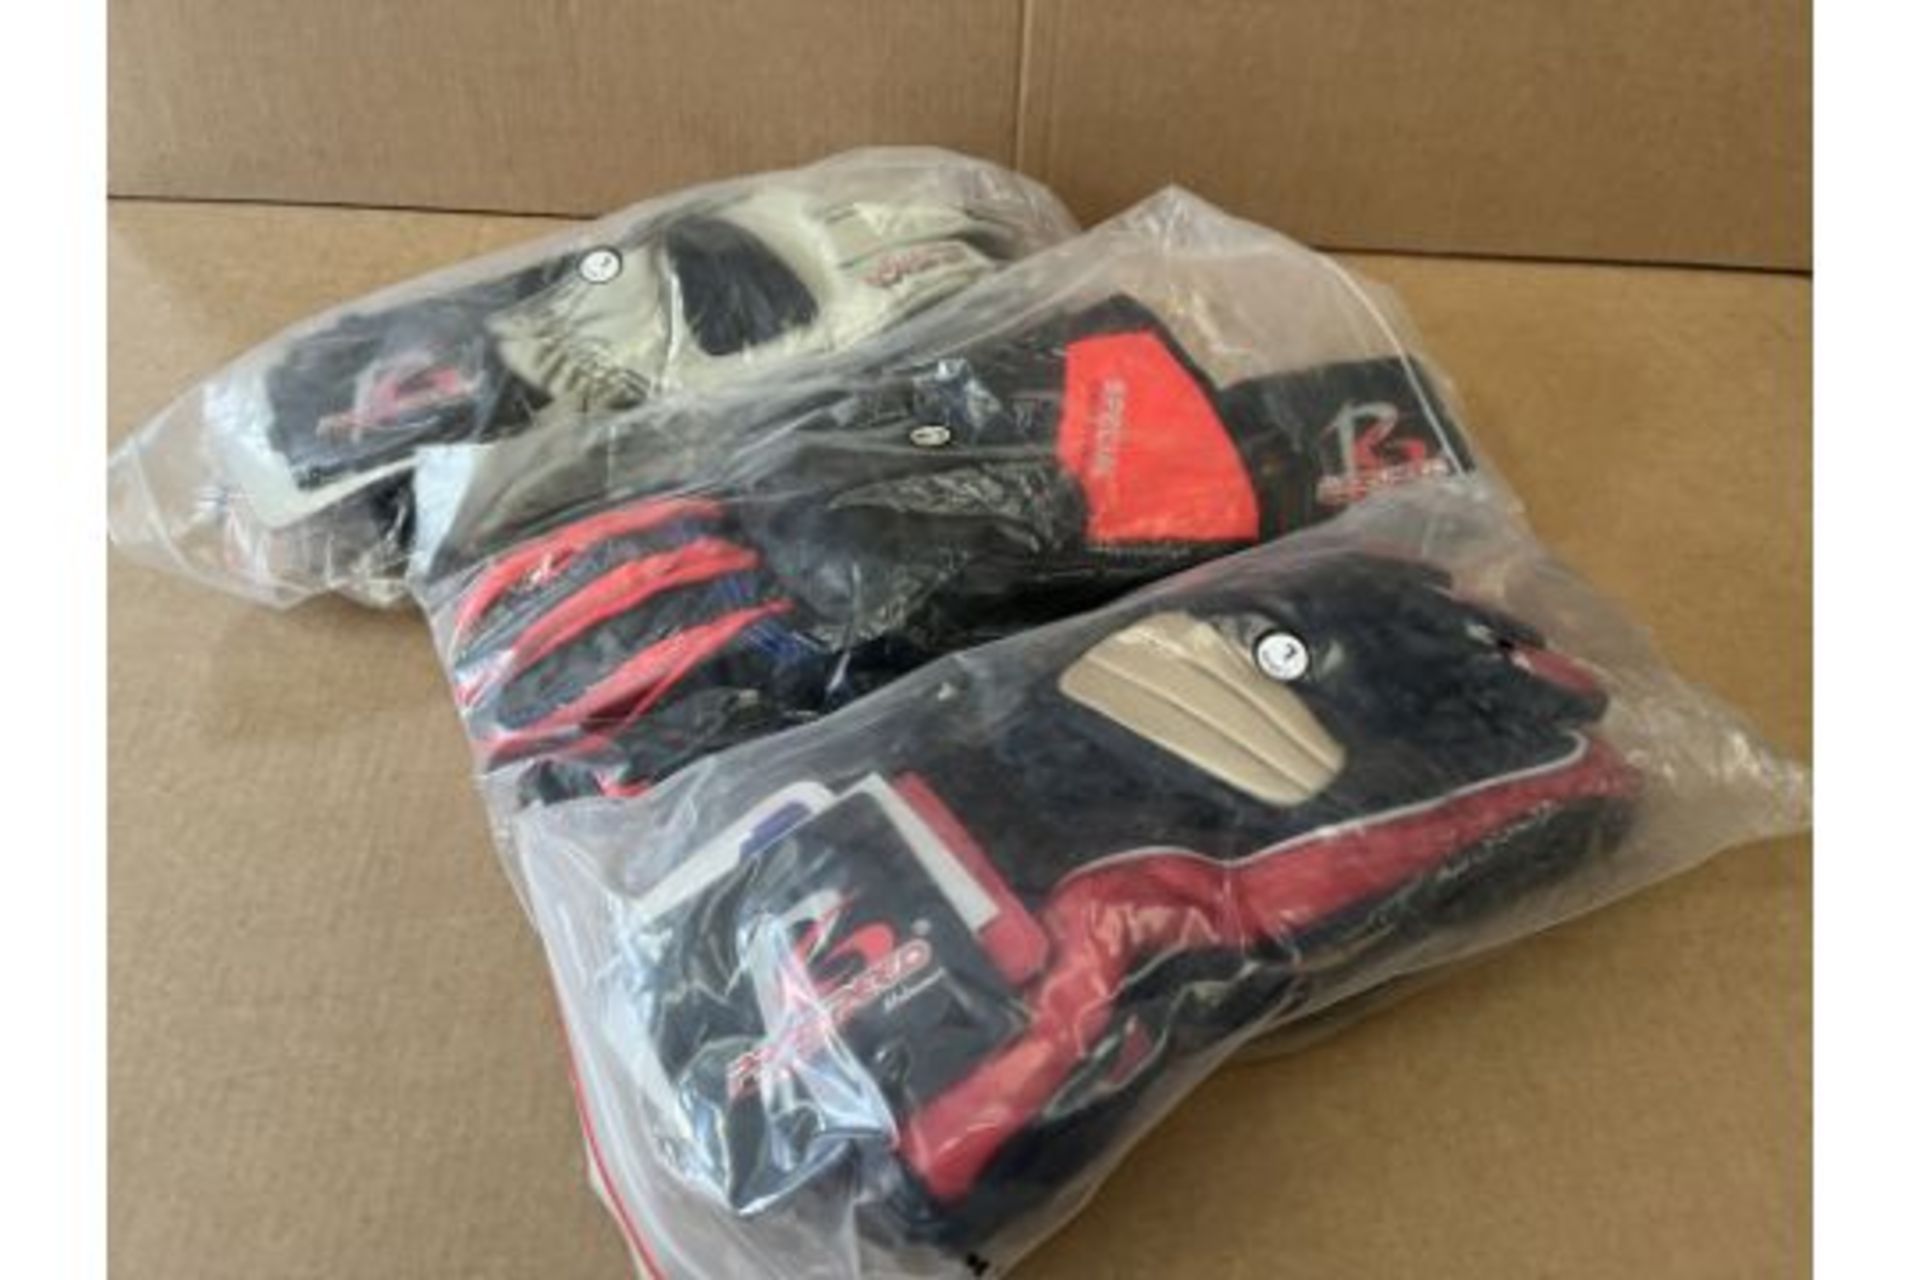 12 X BRAND NEW PRO SPEED HIPORA SPECIAL EDITION 3M PROFESSIONAL MOTORBIKE GLOVES SIZE LARGE S1P